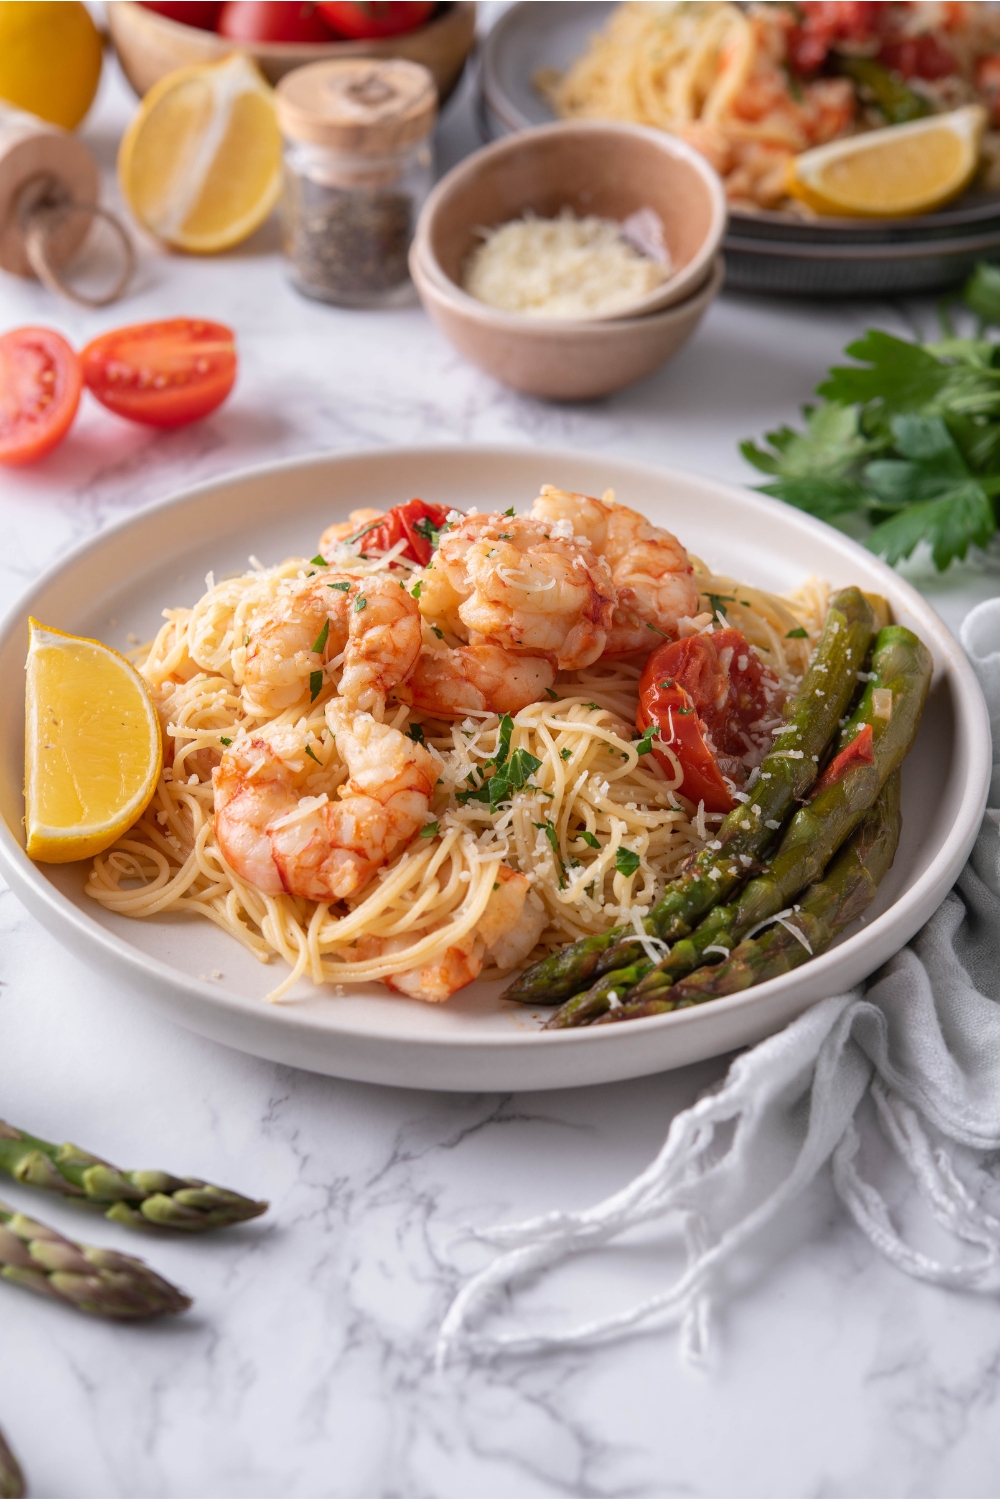 Olive Garden shrimp scampi piled on a white plate with a side of asparagus and a lemon wedge. The shrimp is garnished with fresh green herbs and there is a second serving of pasta in the background.